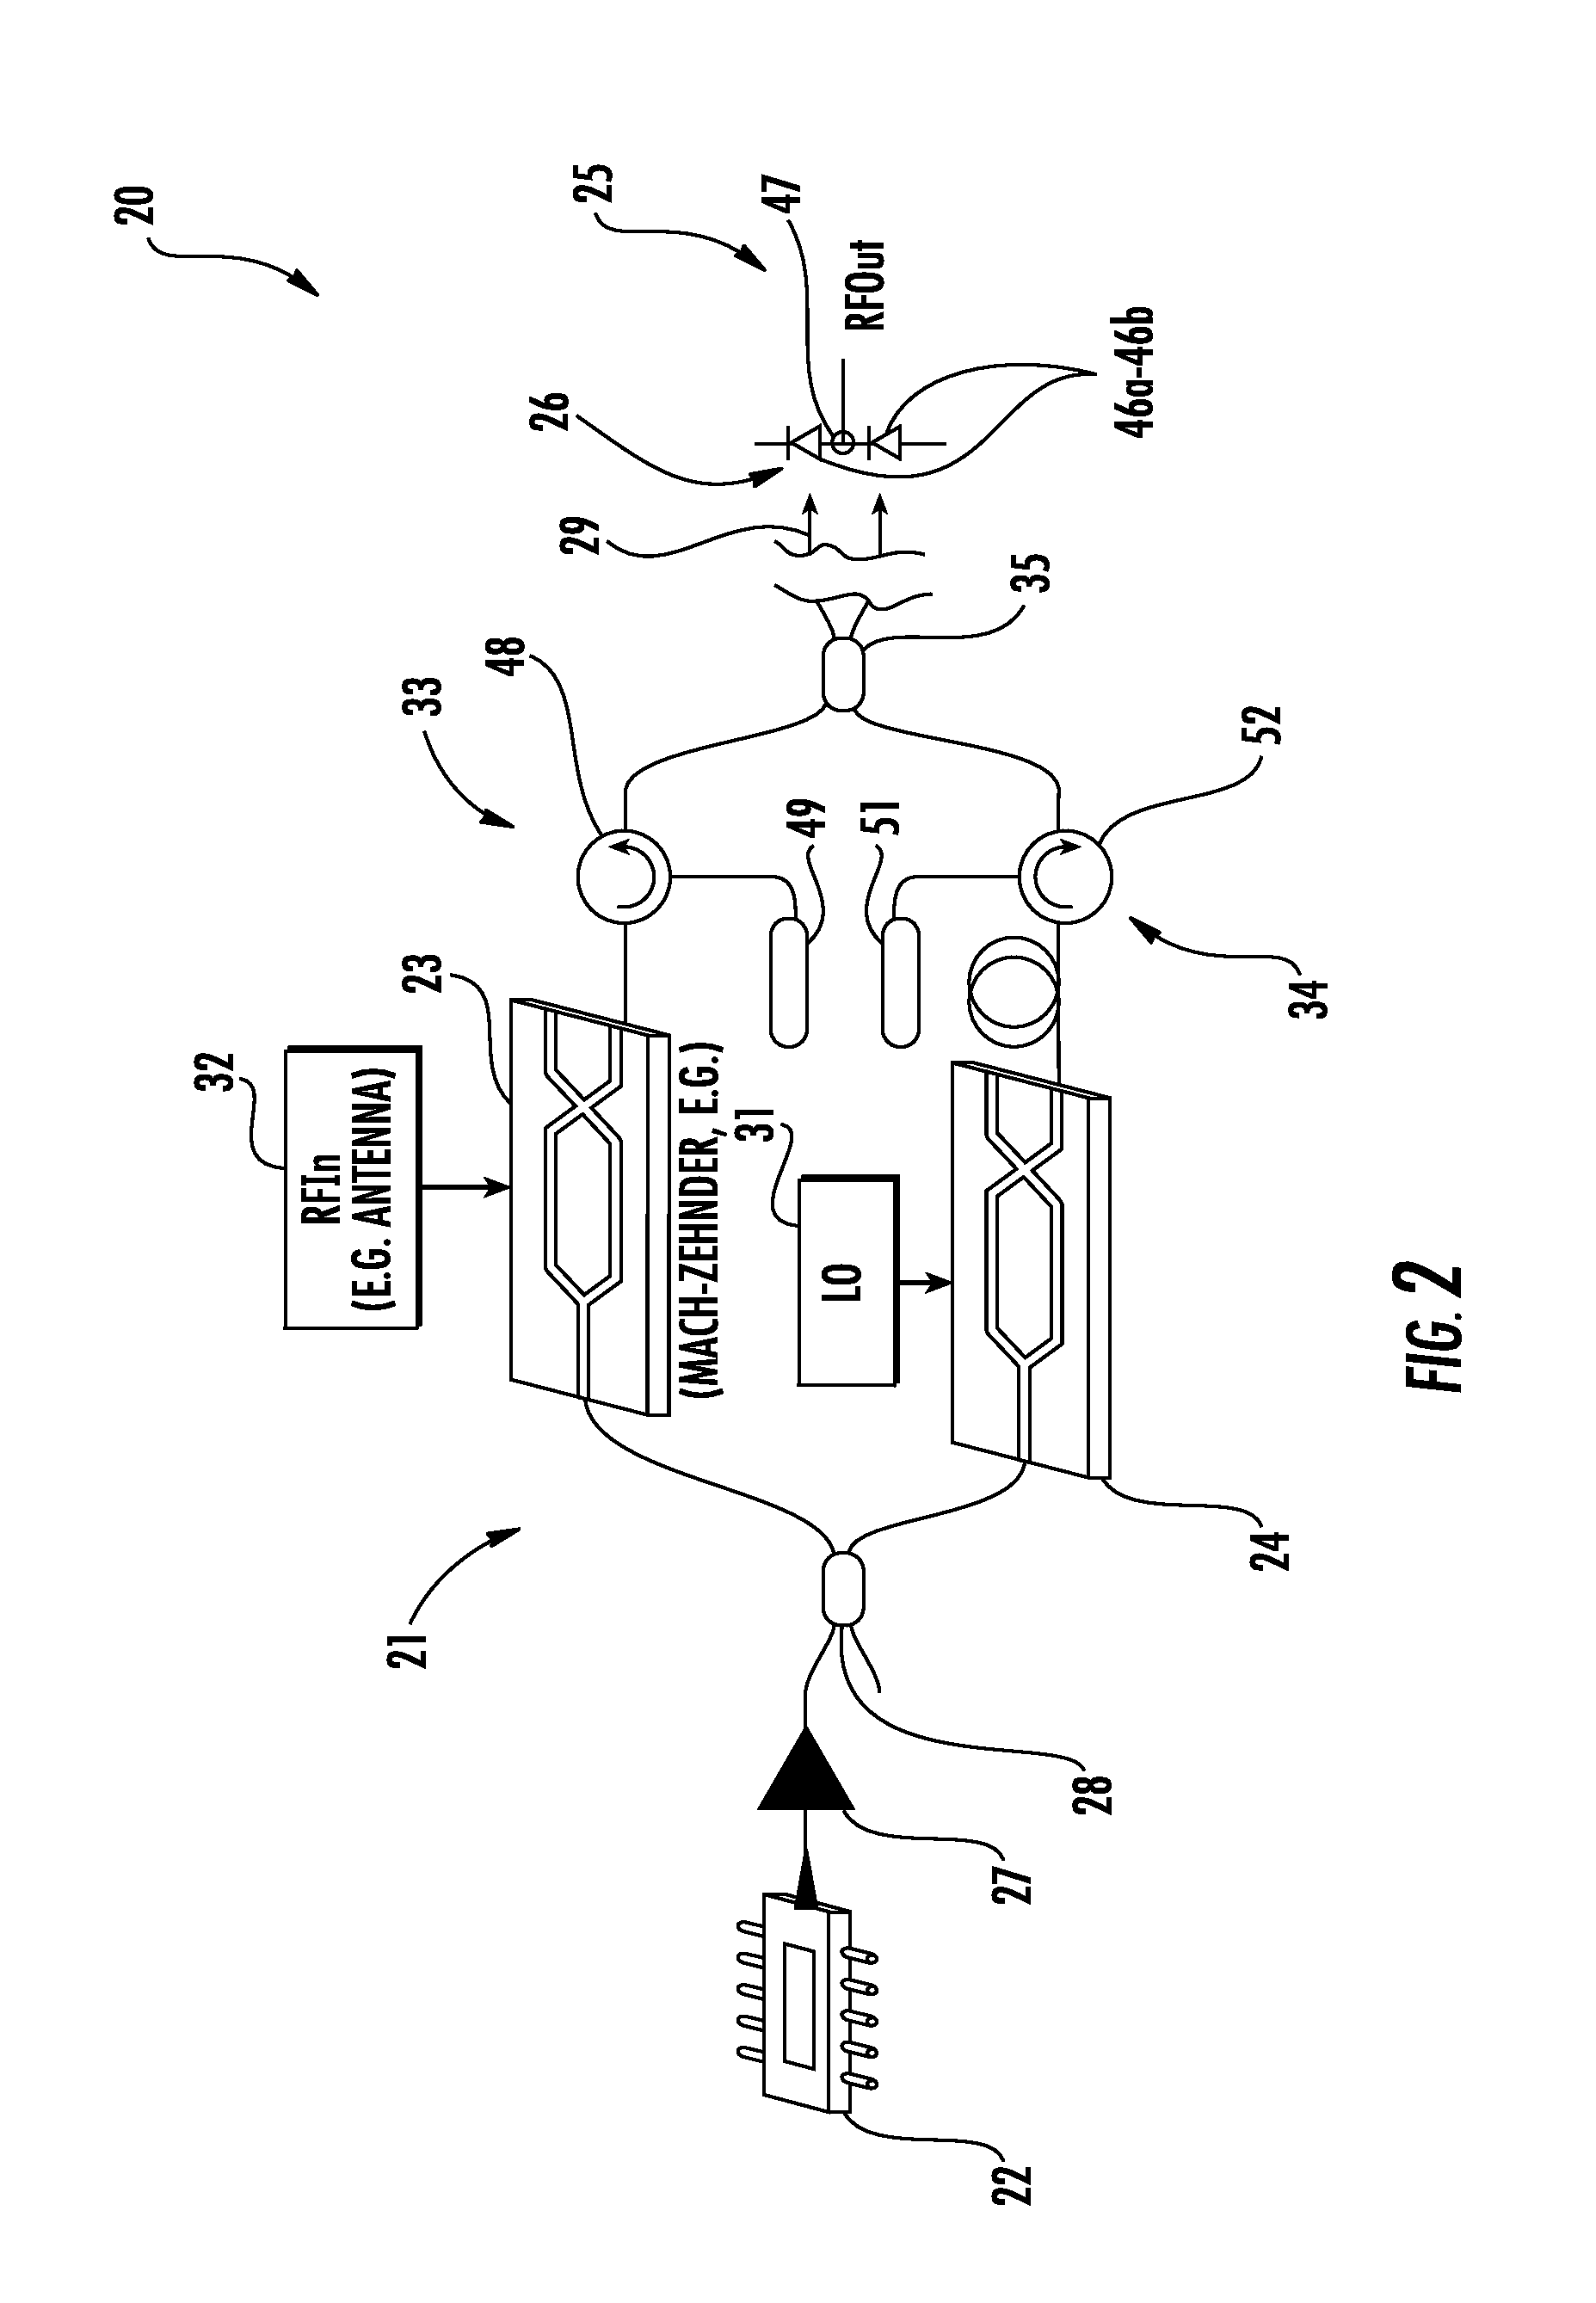 Electro-optic communications device with frequency conversion and related methods